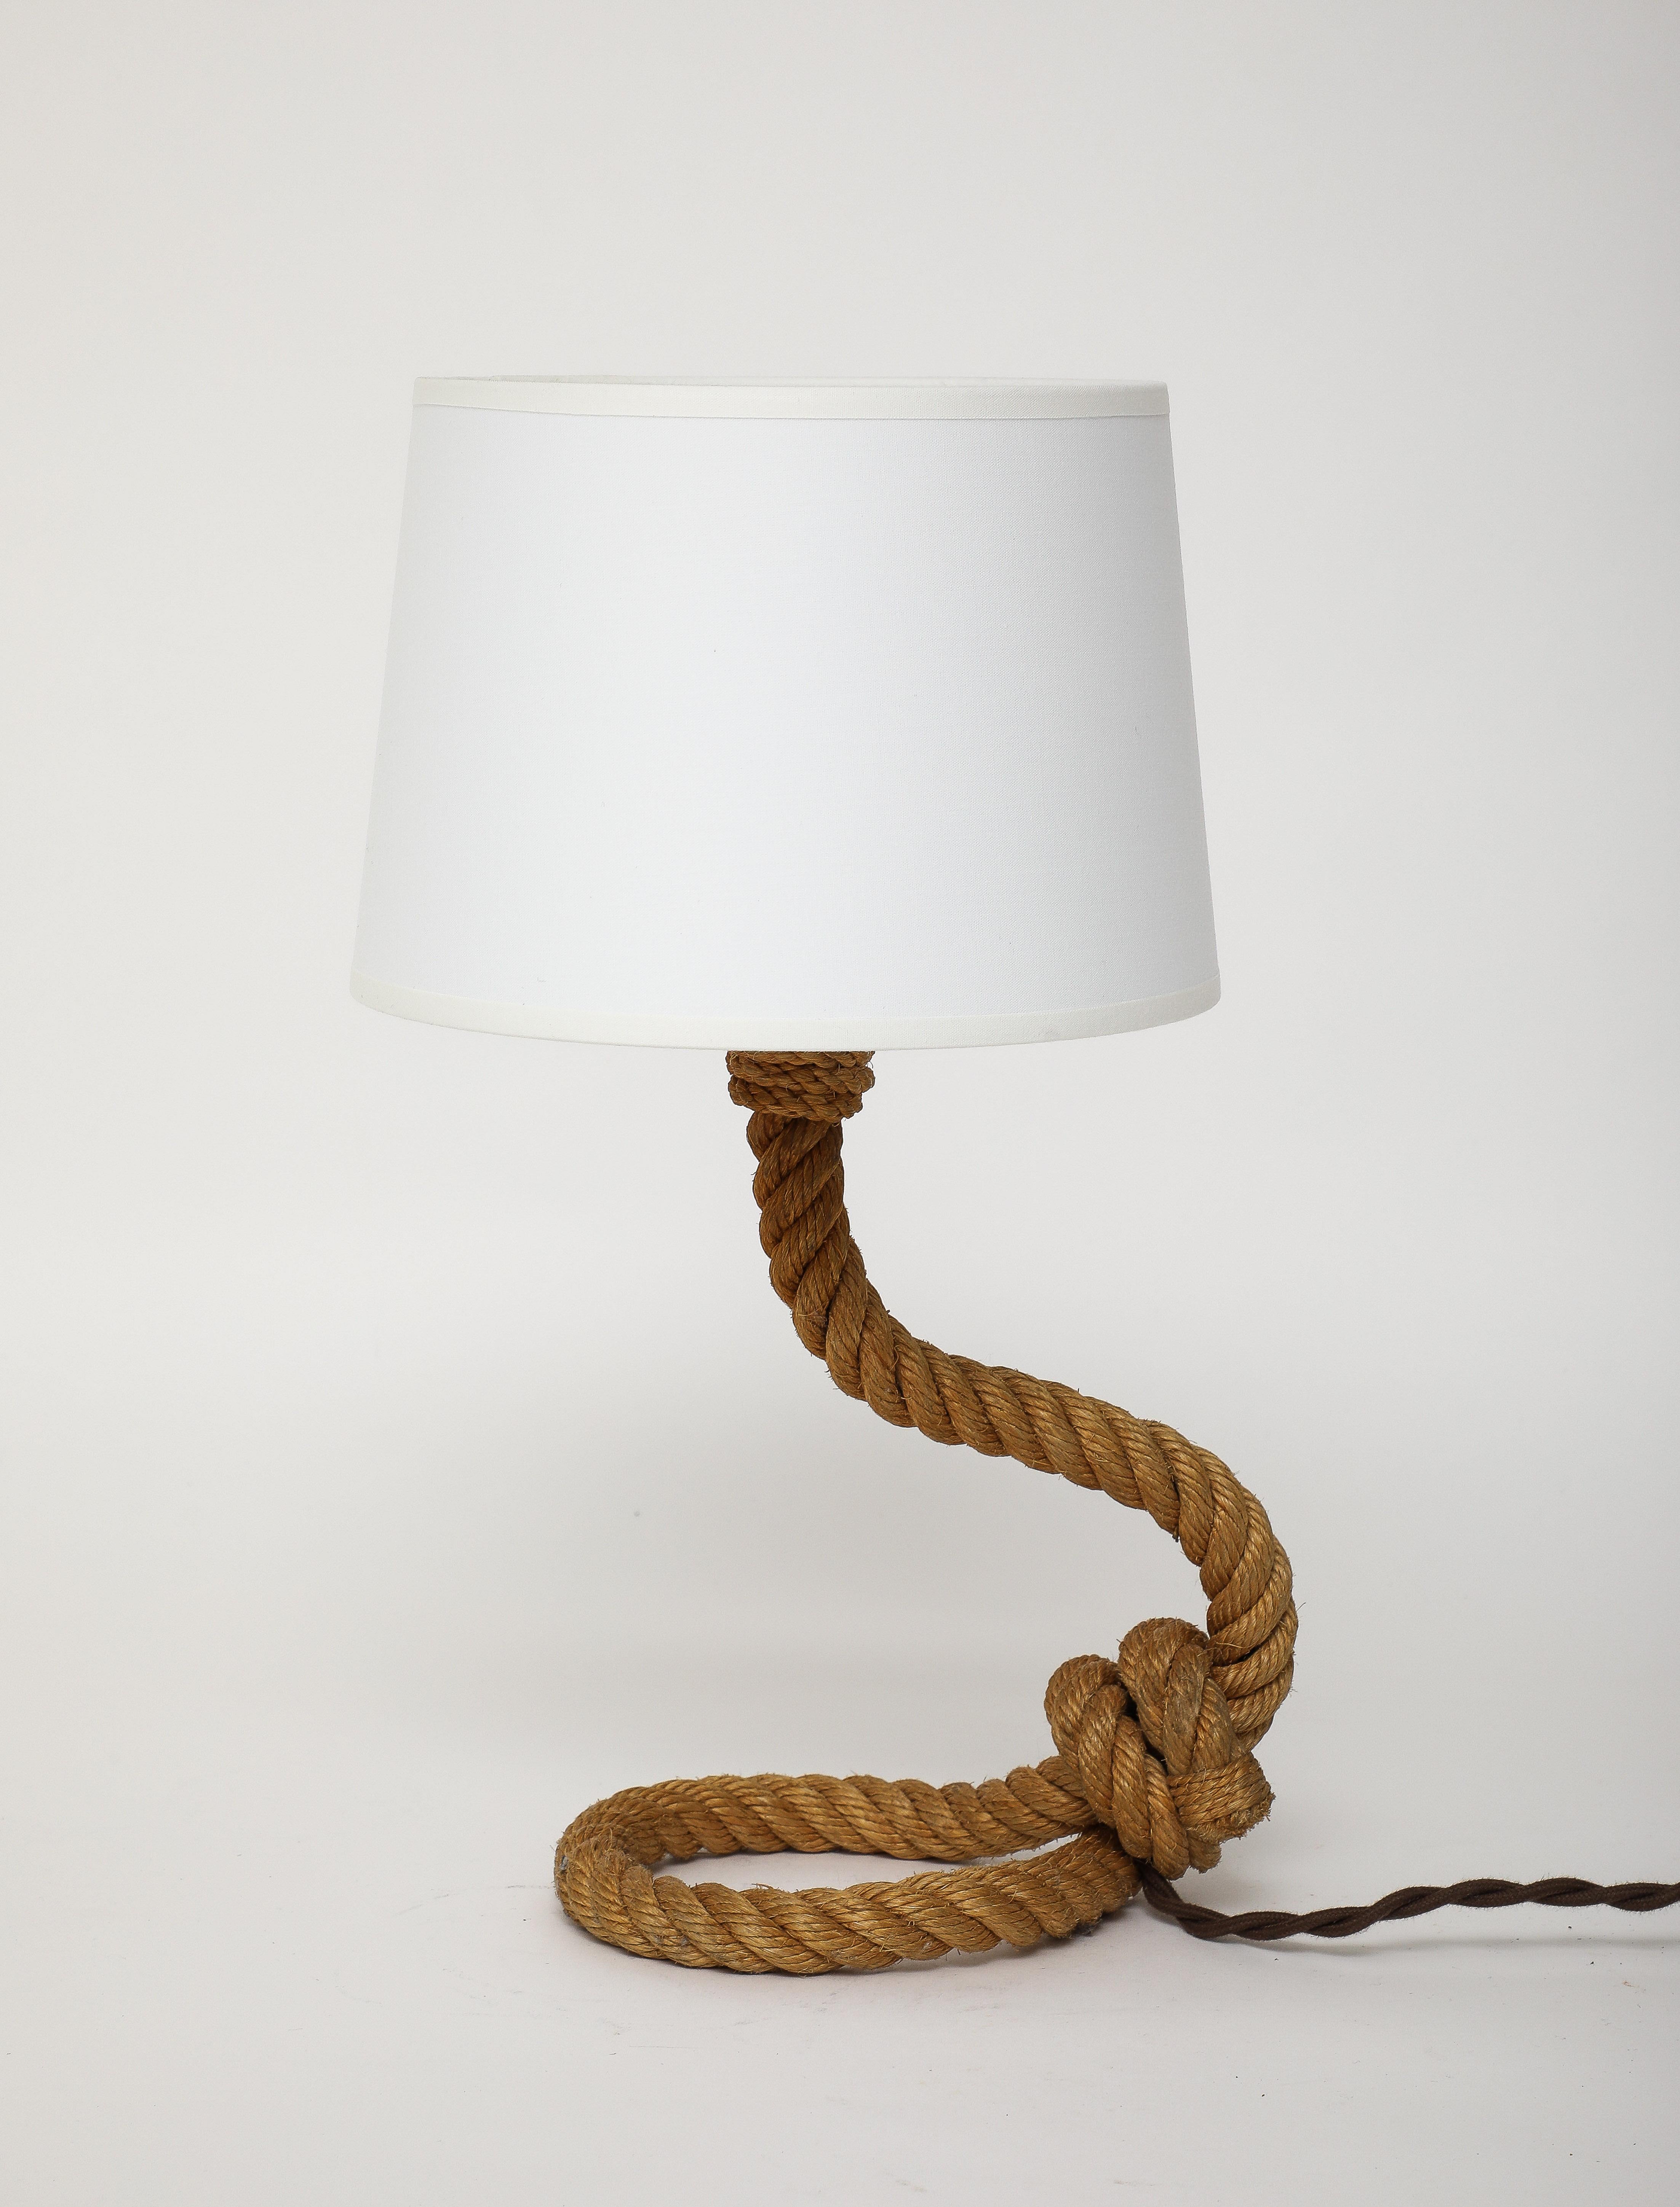 French Petite Rope Table Lamp by Audoux Minnet - France 1960's